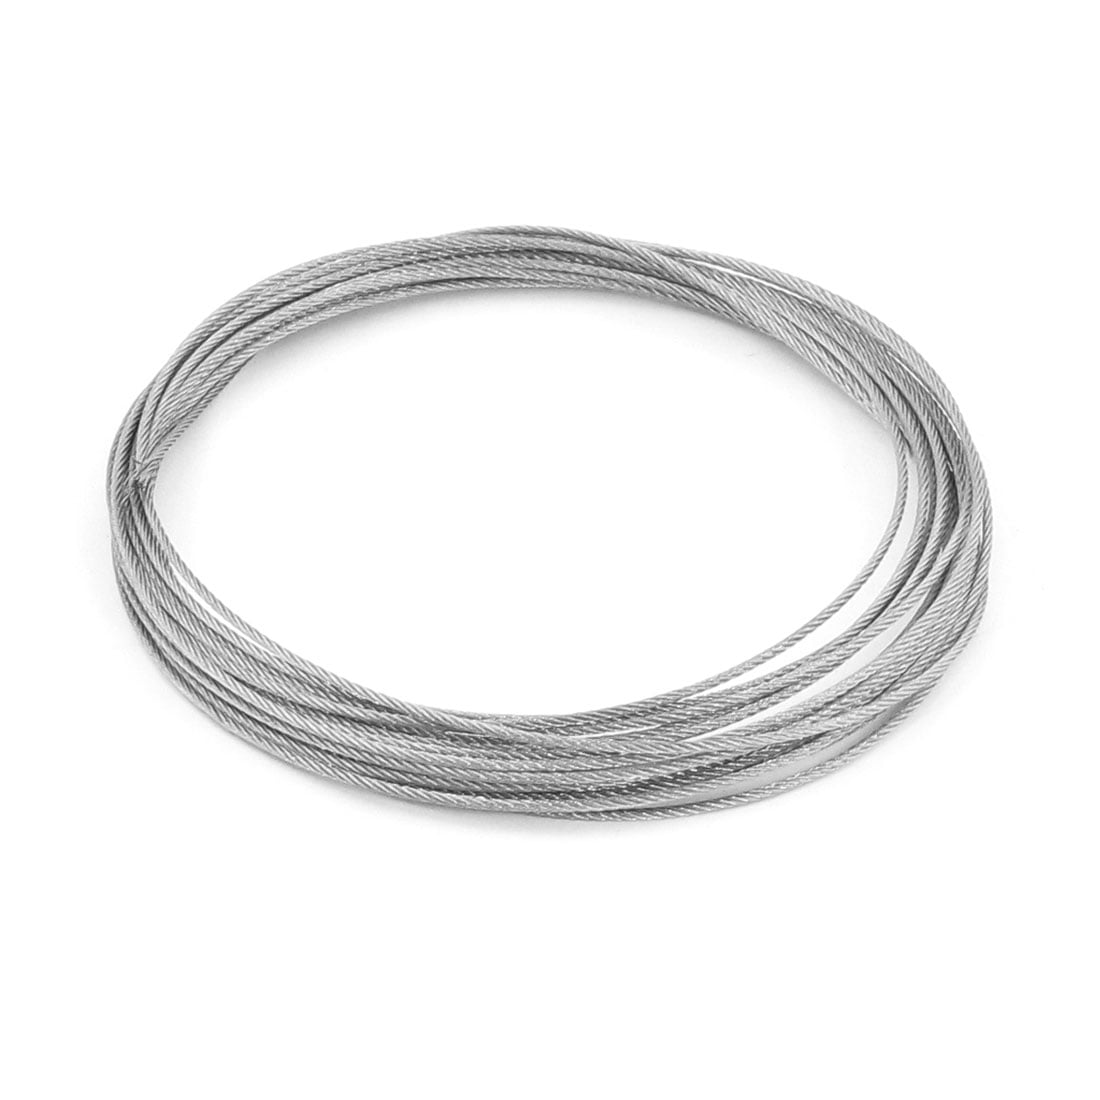 1-100M 1mm 1.5mm 2mm 3mm 4mm Stainless Steel Wire Rope Cable Railings 7x7 